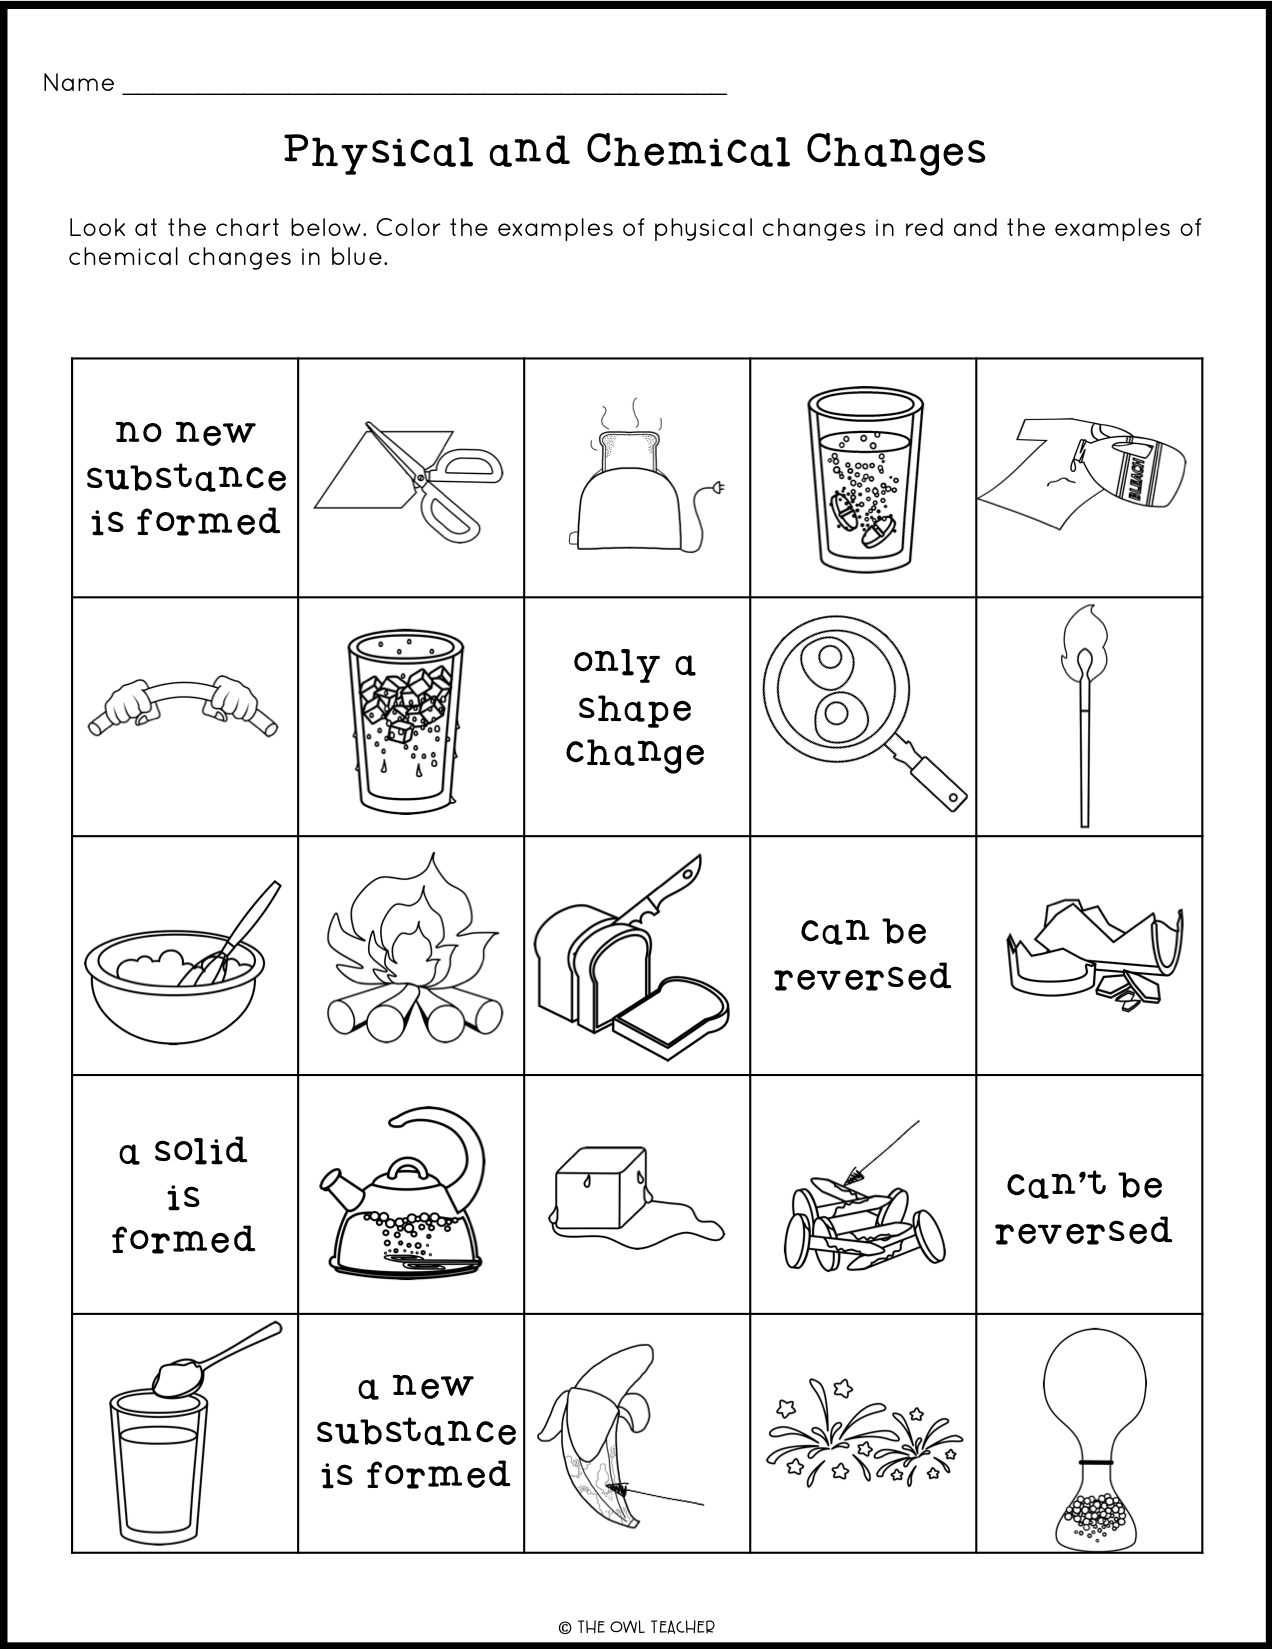 Physical and Chemical Changes Craftivity - The Owl Teacher Regarding Physical And Chemical Change Worksheet